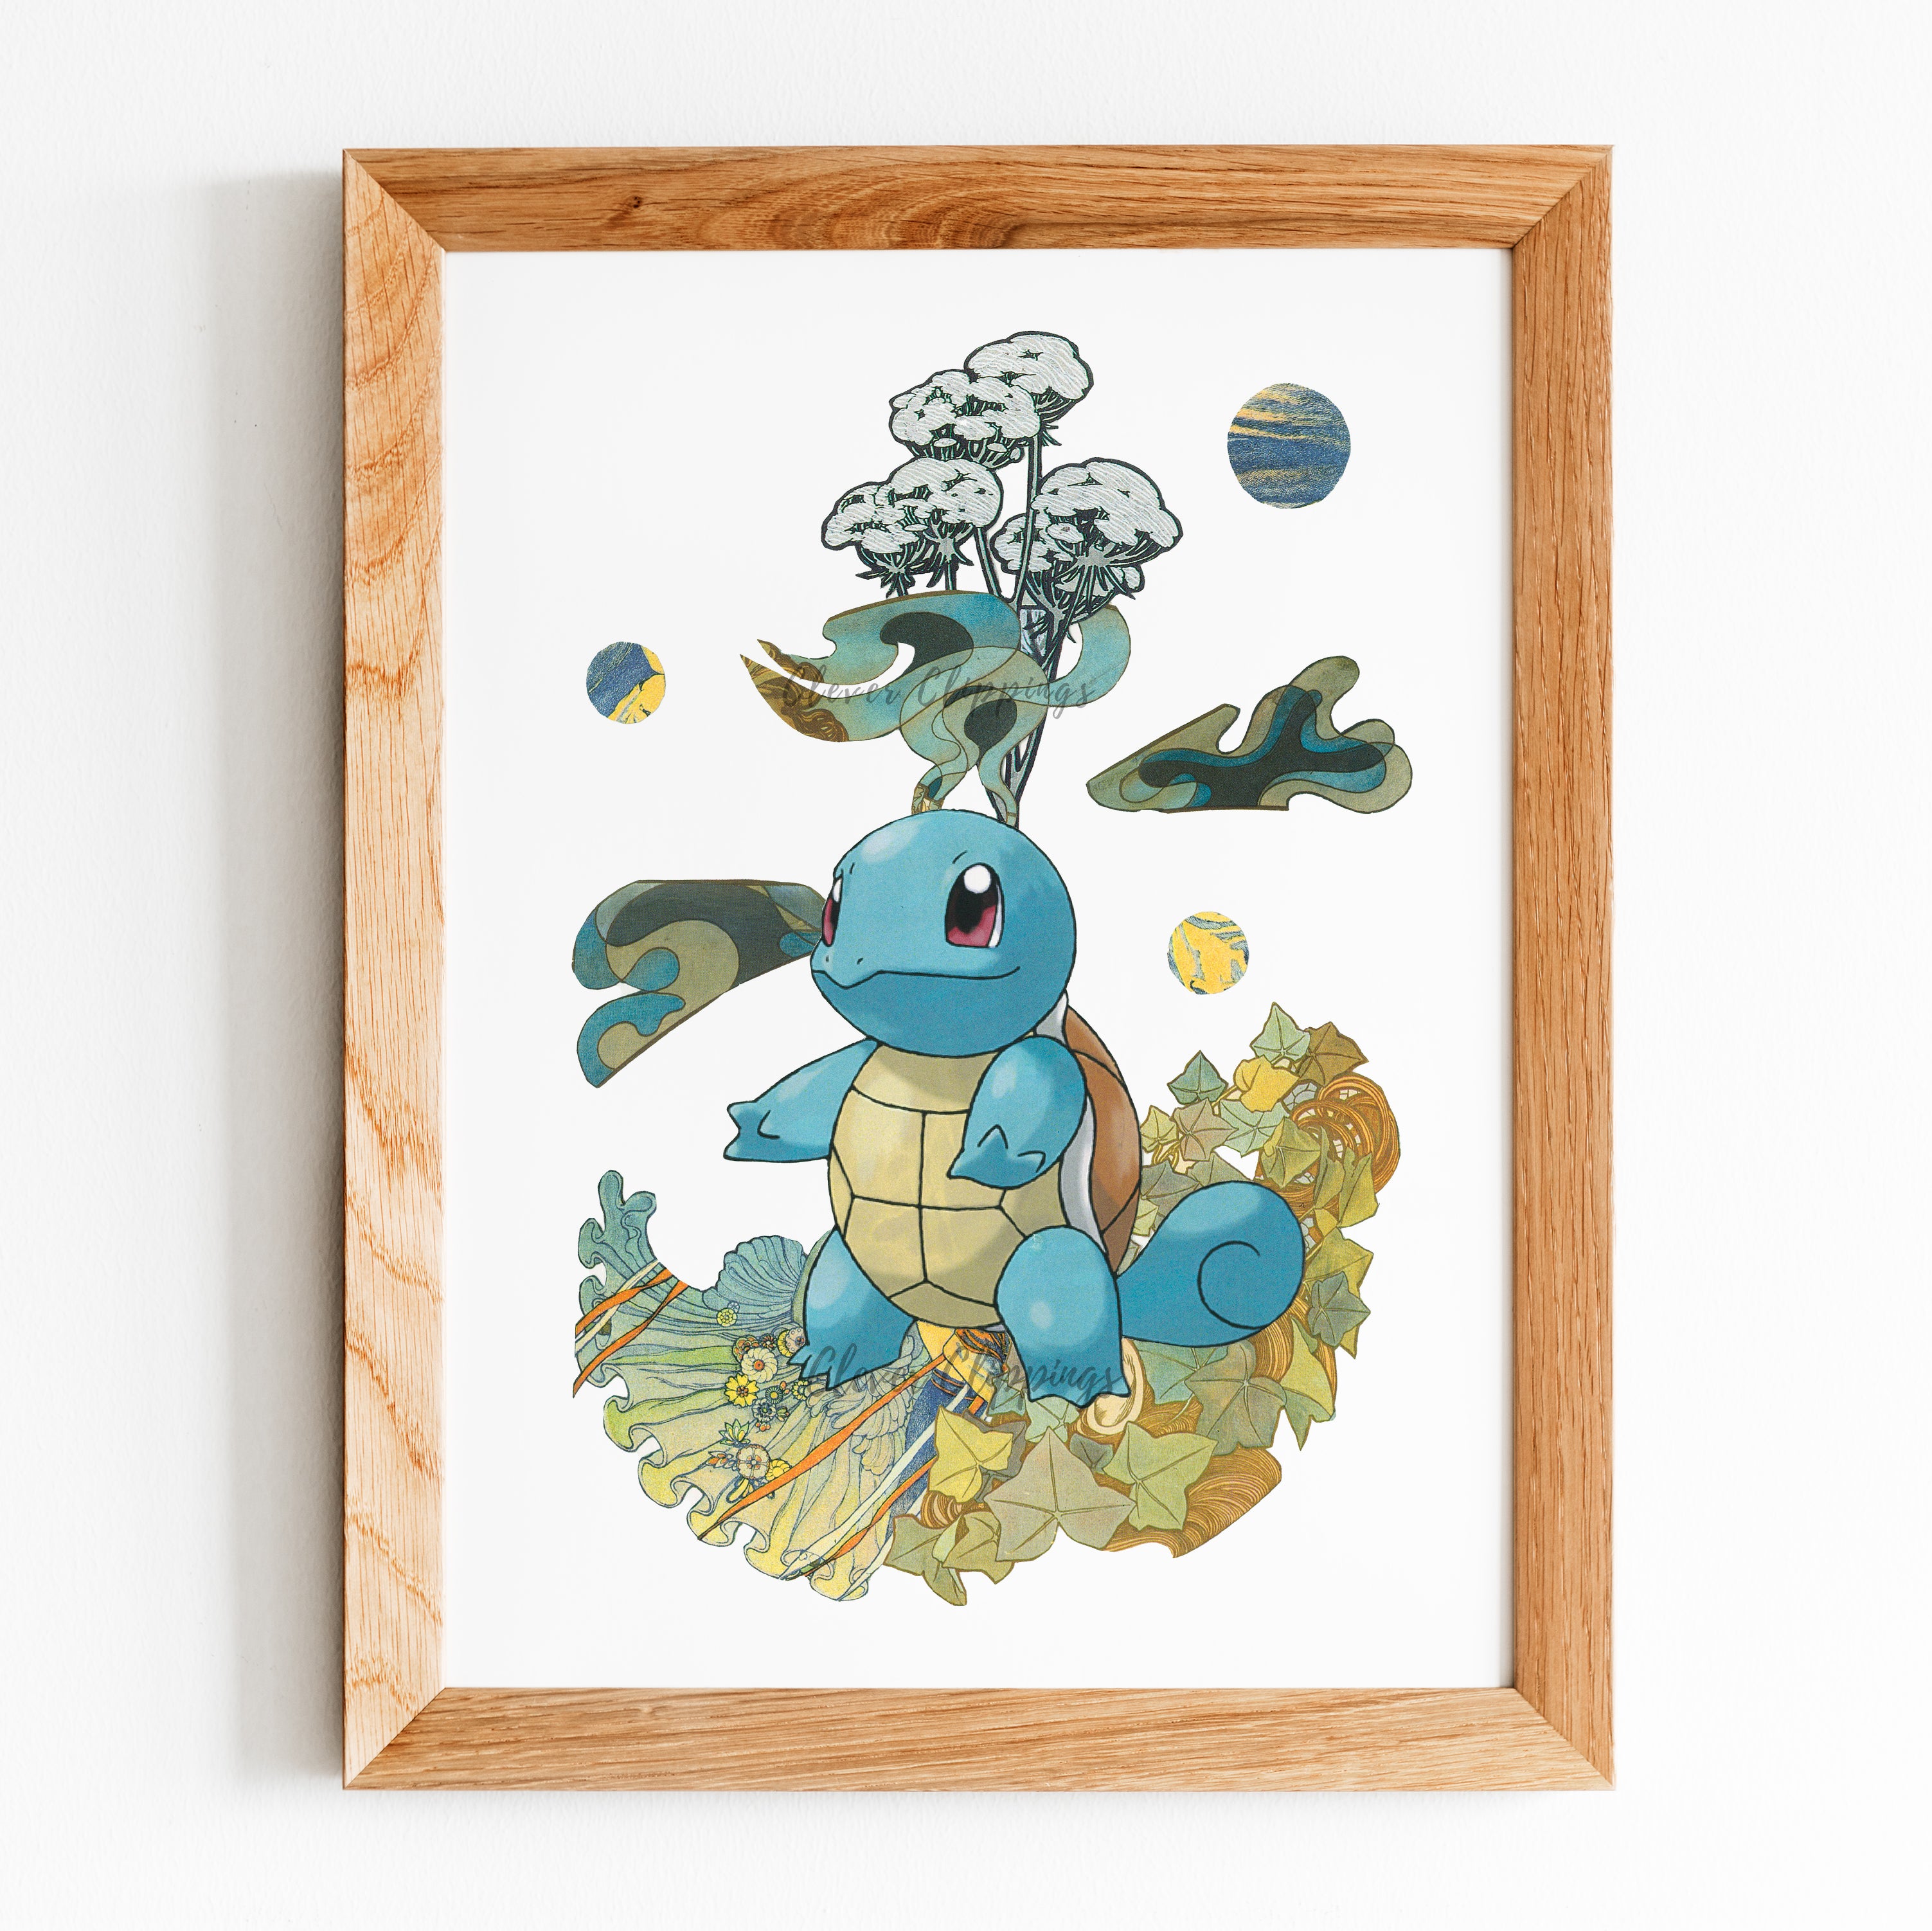 Pika and squirrels caught red-handed - Toronto Art - Collage Art - Squirtle